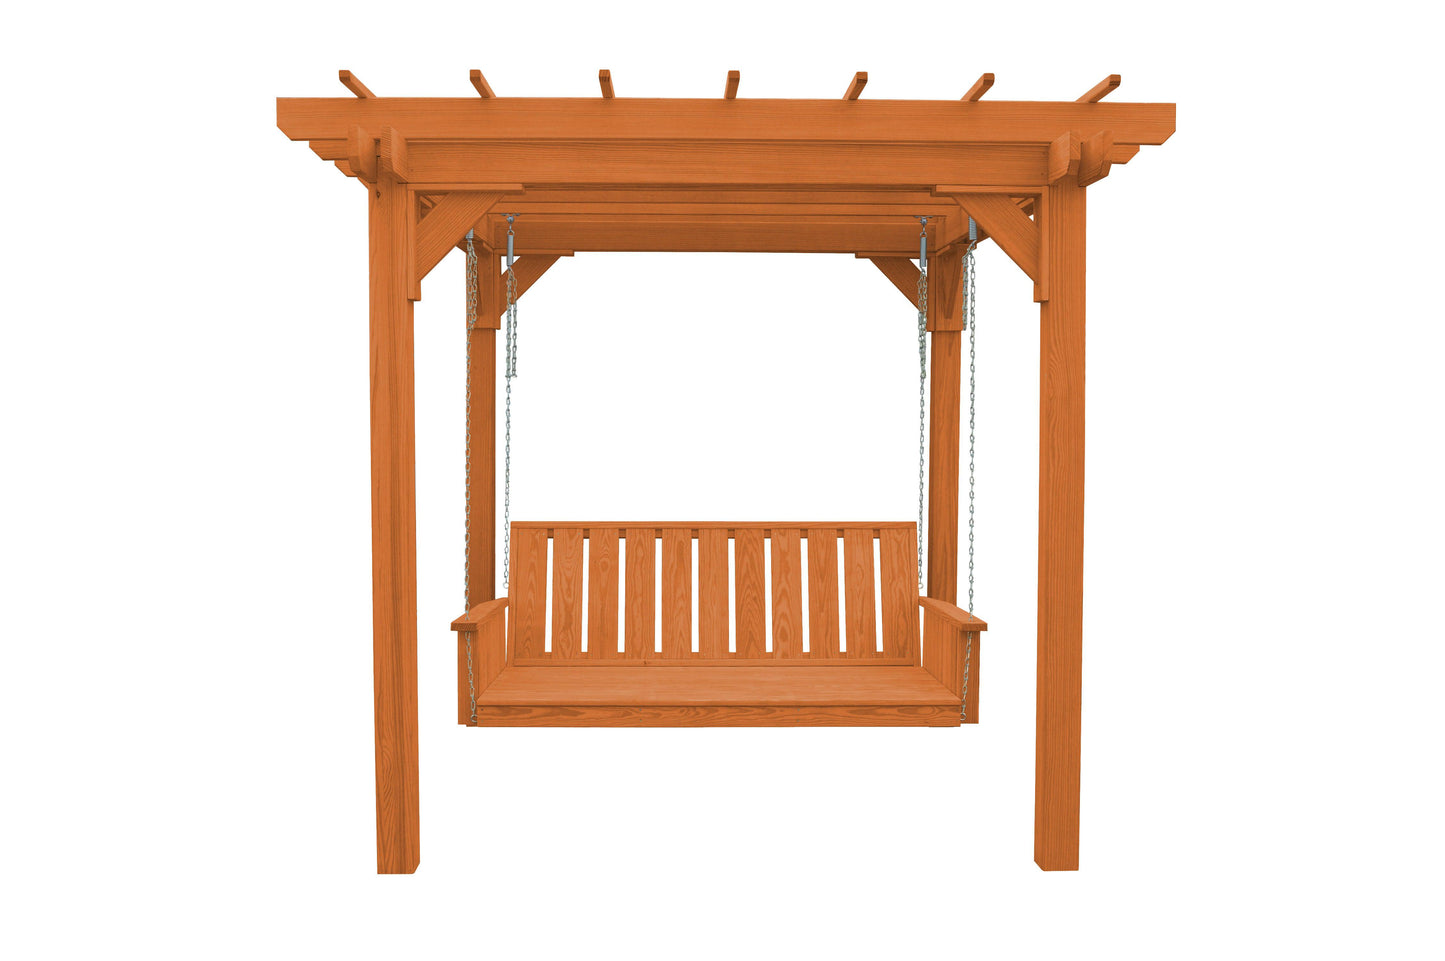 A&L Furniture Co. Pressure Treated Pine  6' x 8' Bradford Pergola with Swing Hangers - LEAD TIME TO SHIP 10 BUSINESS DAYS